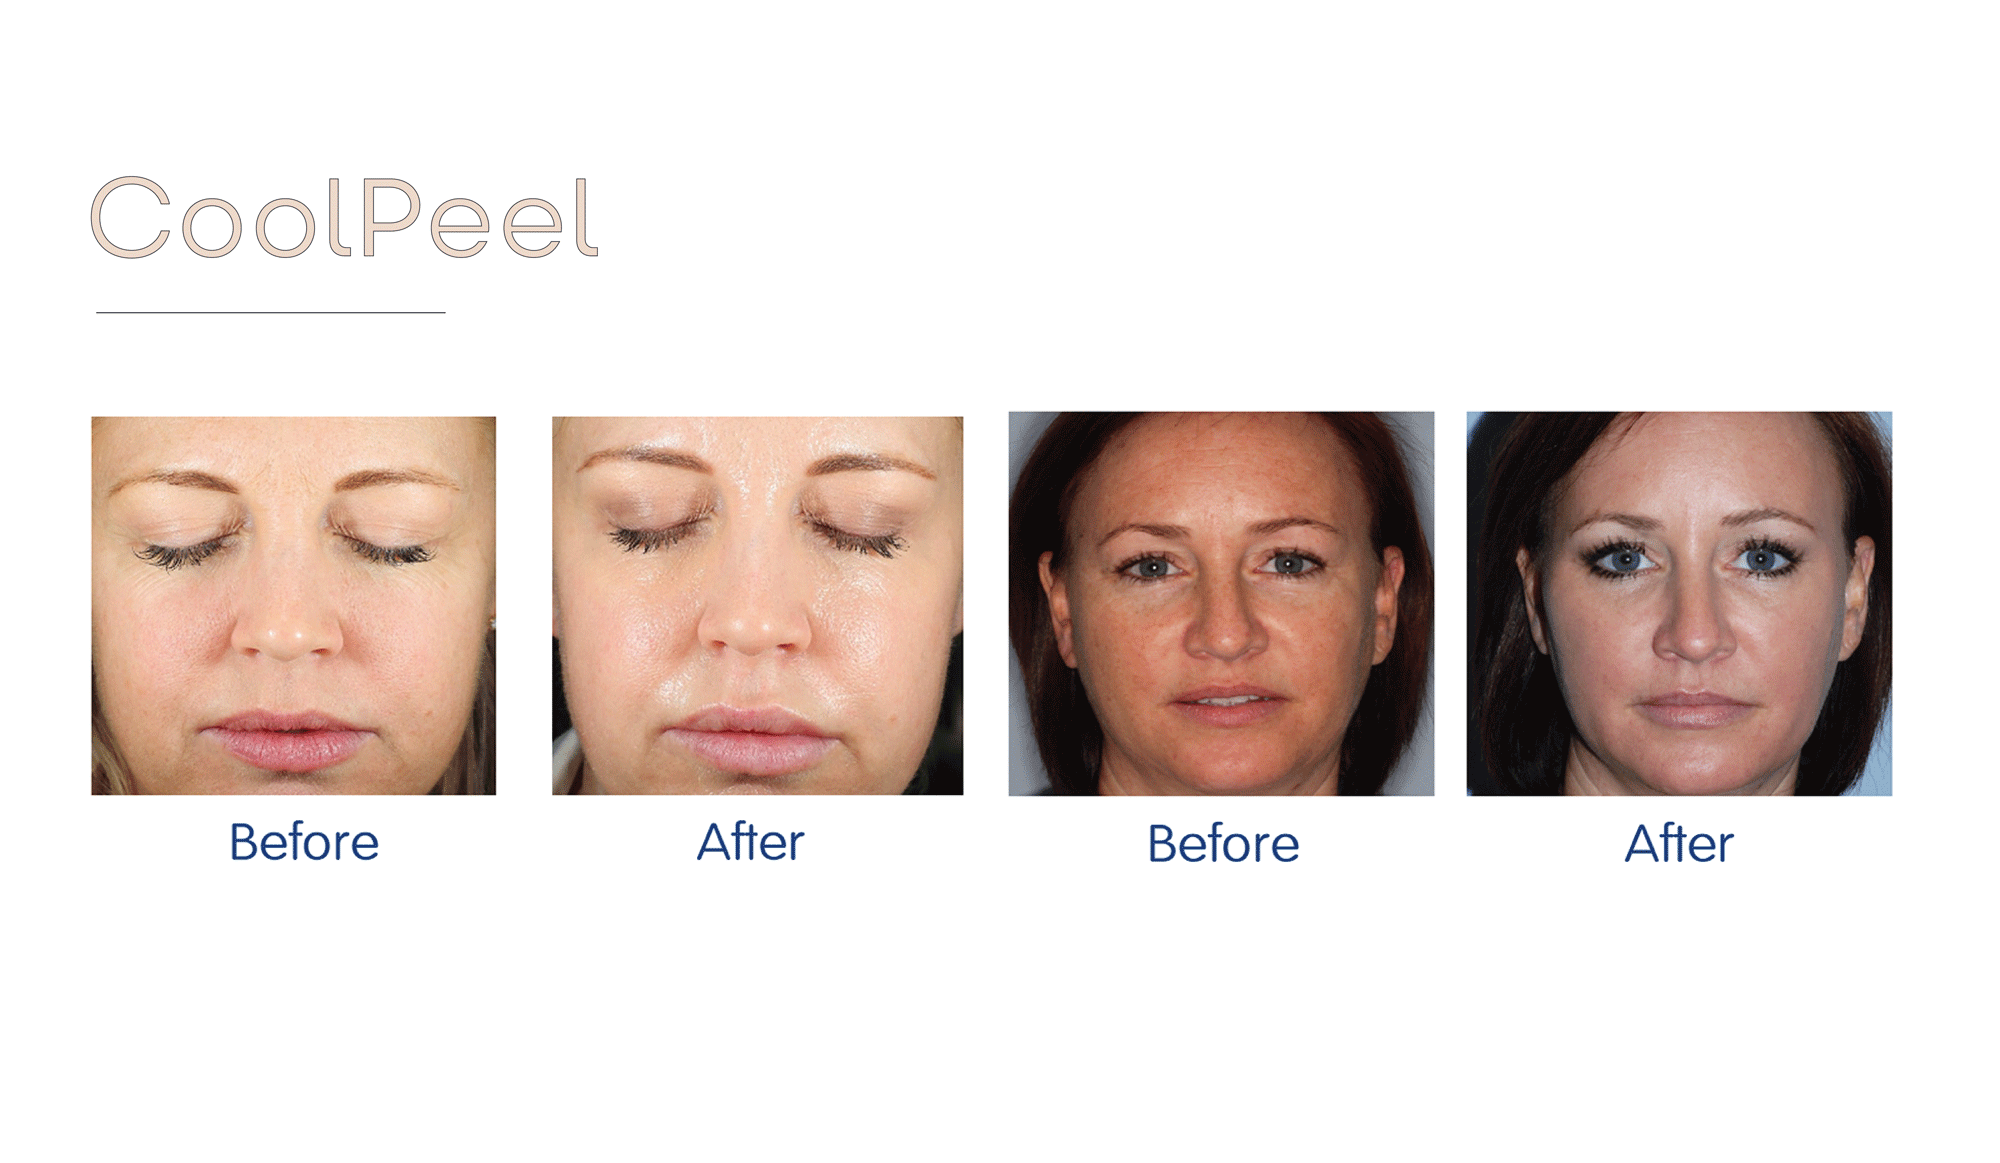 Incredible results from our revolutionary CoolPeel laser